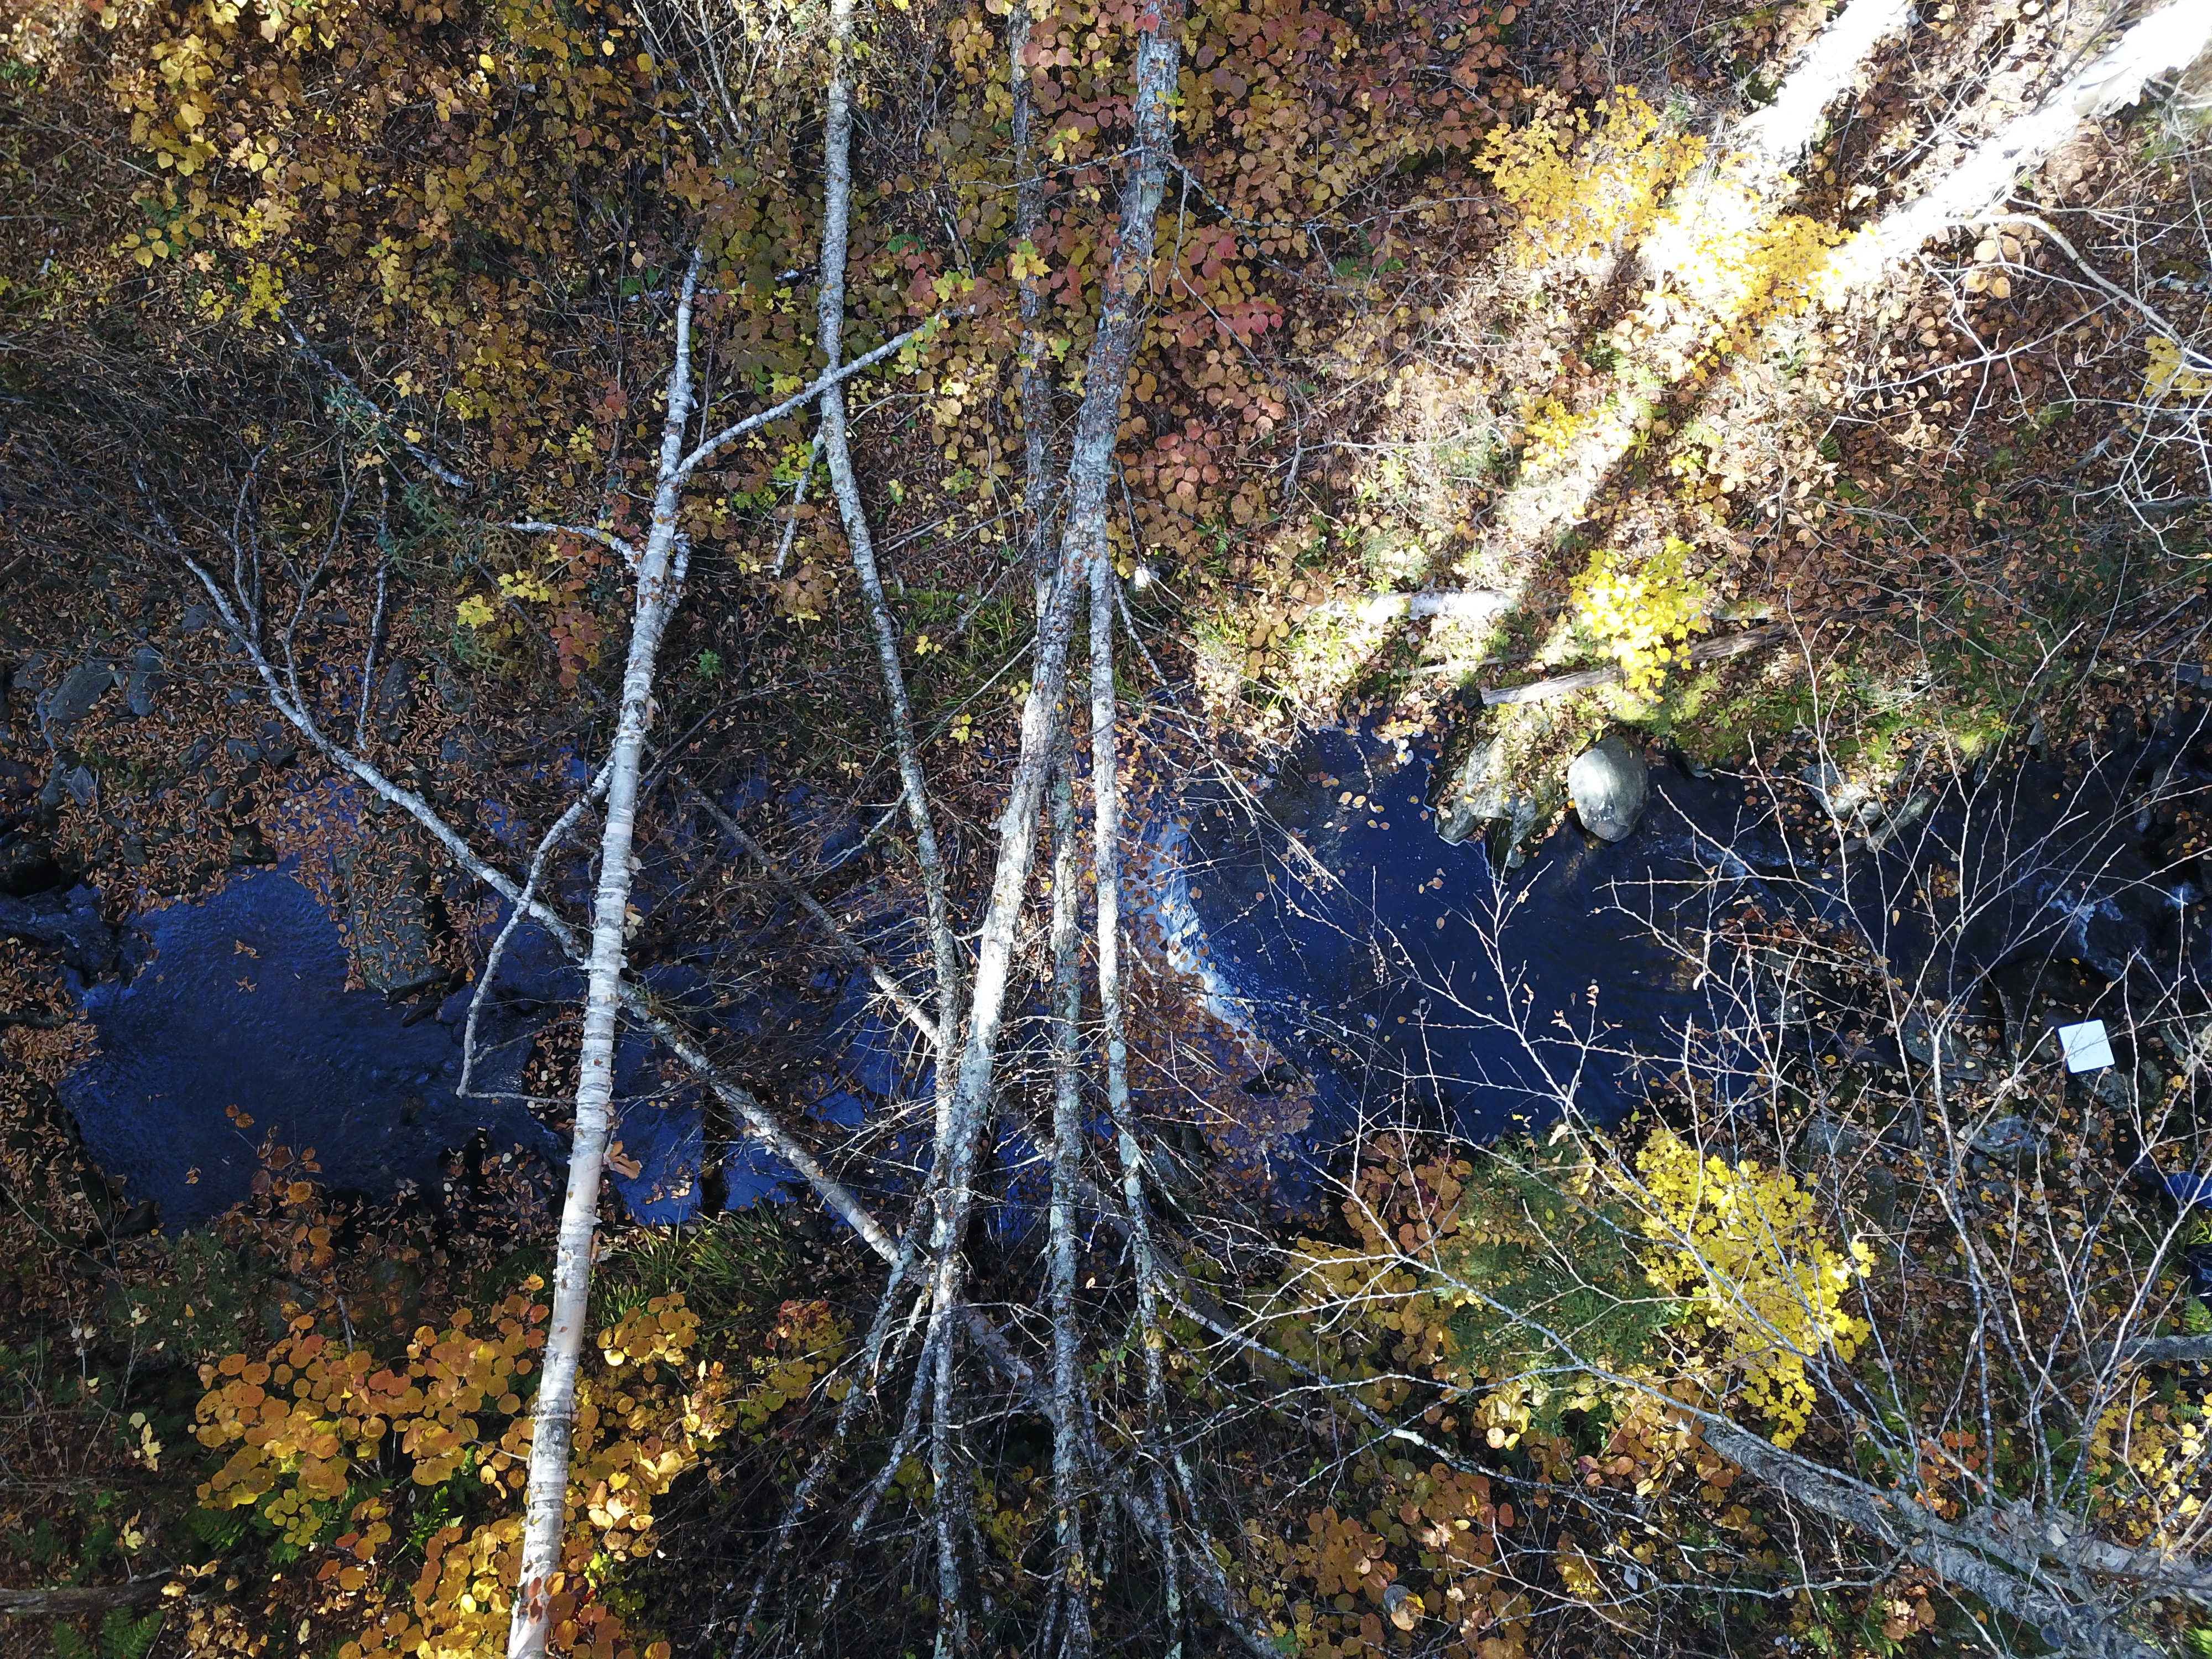 Project on Moose River branches and tributaries